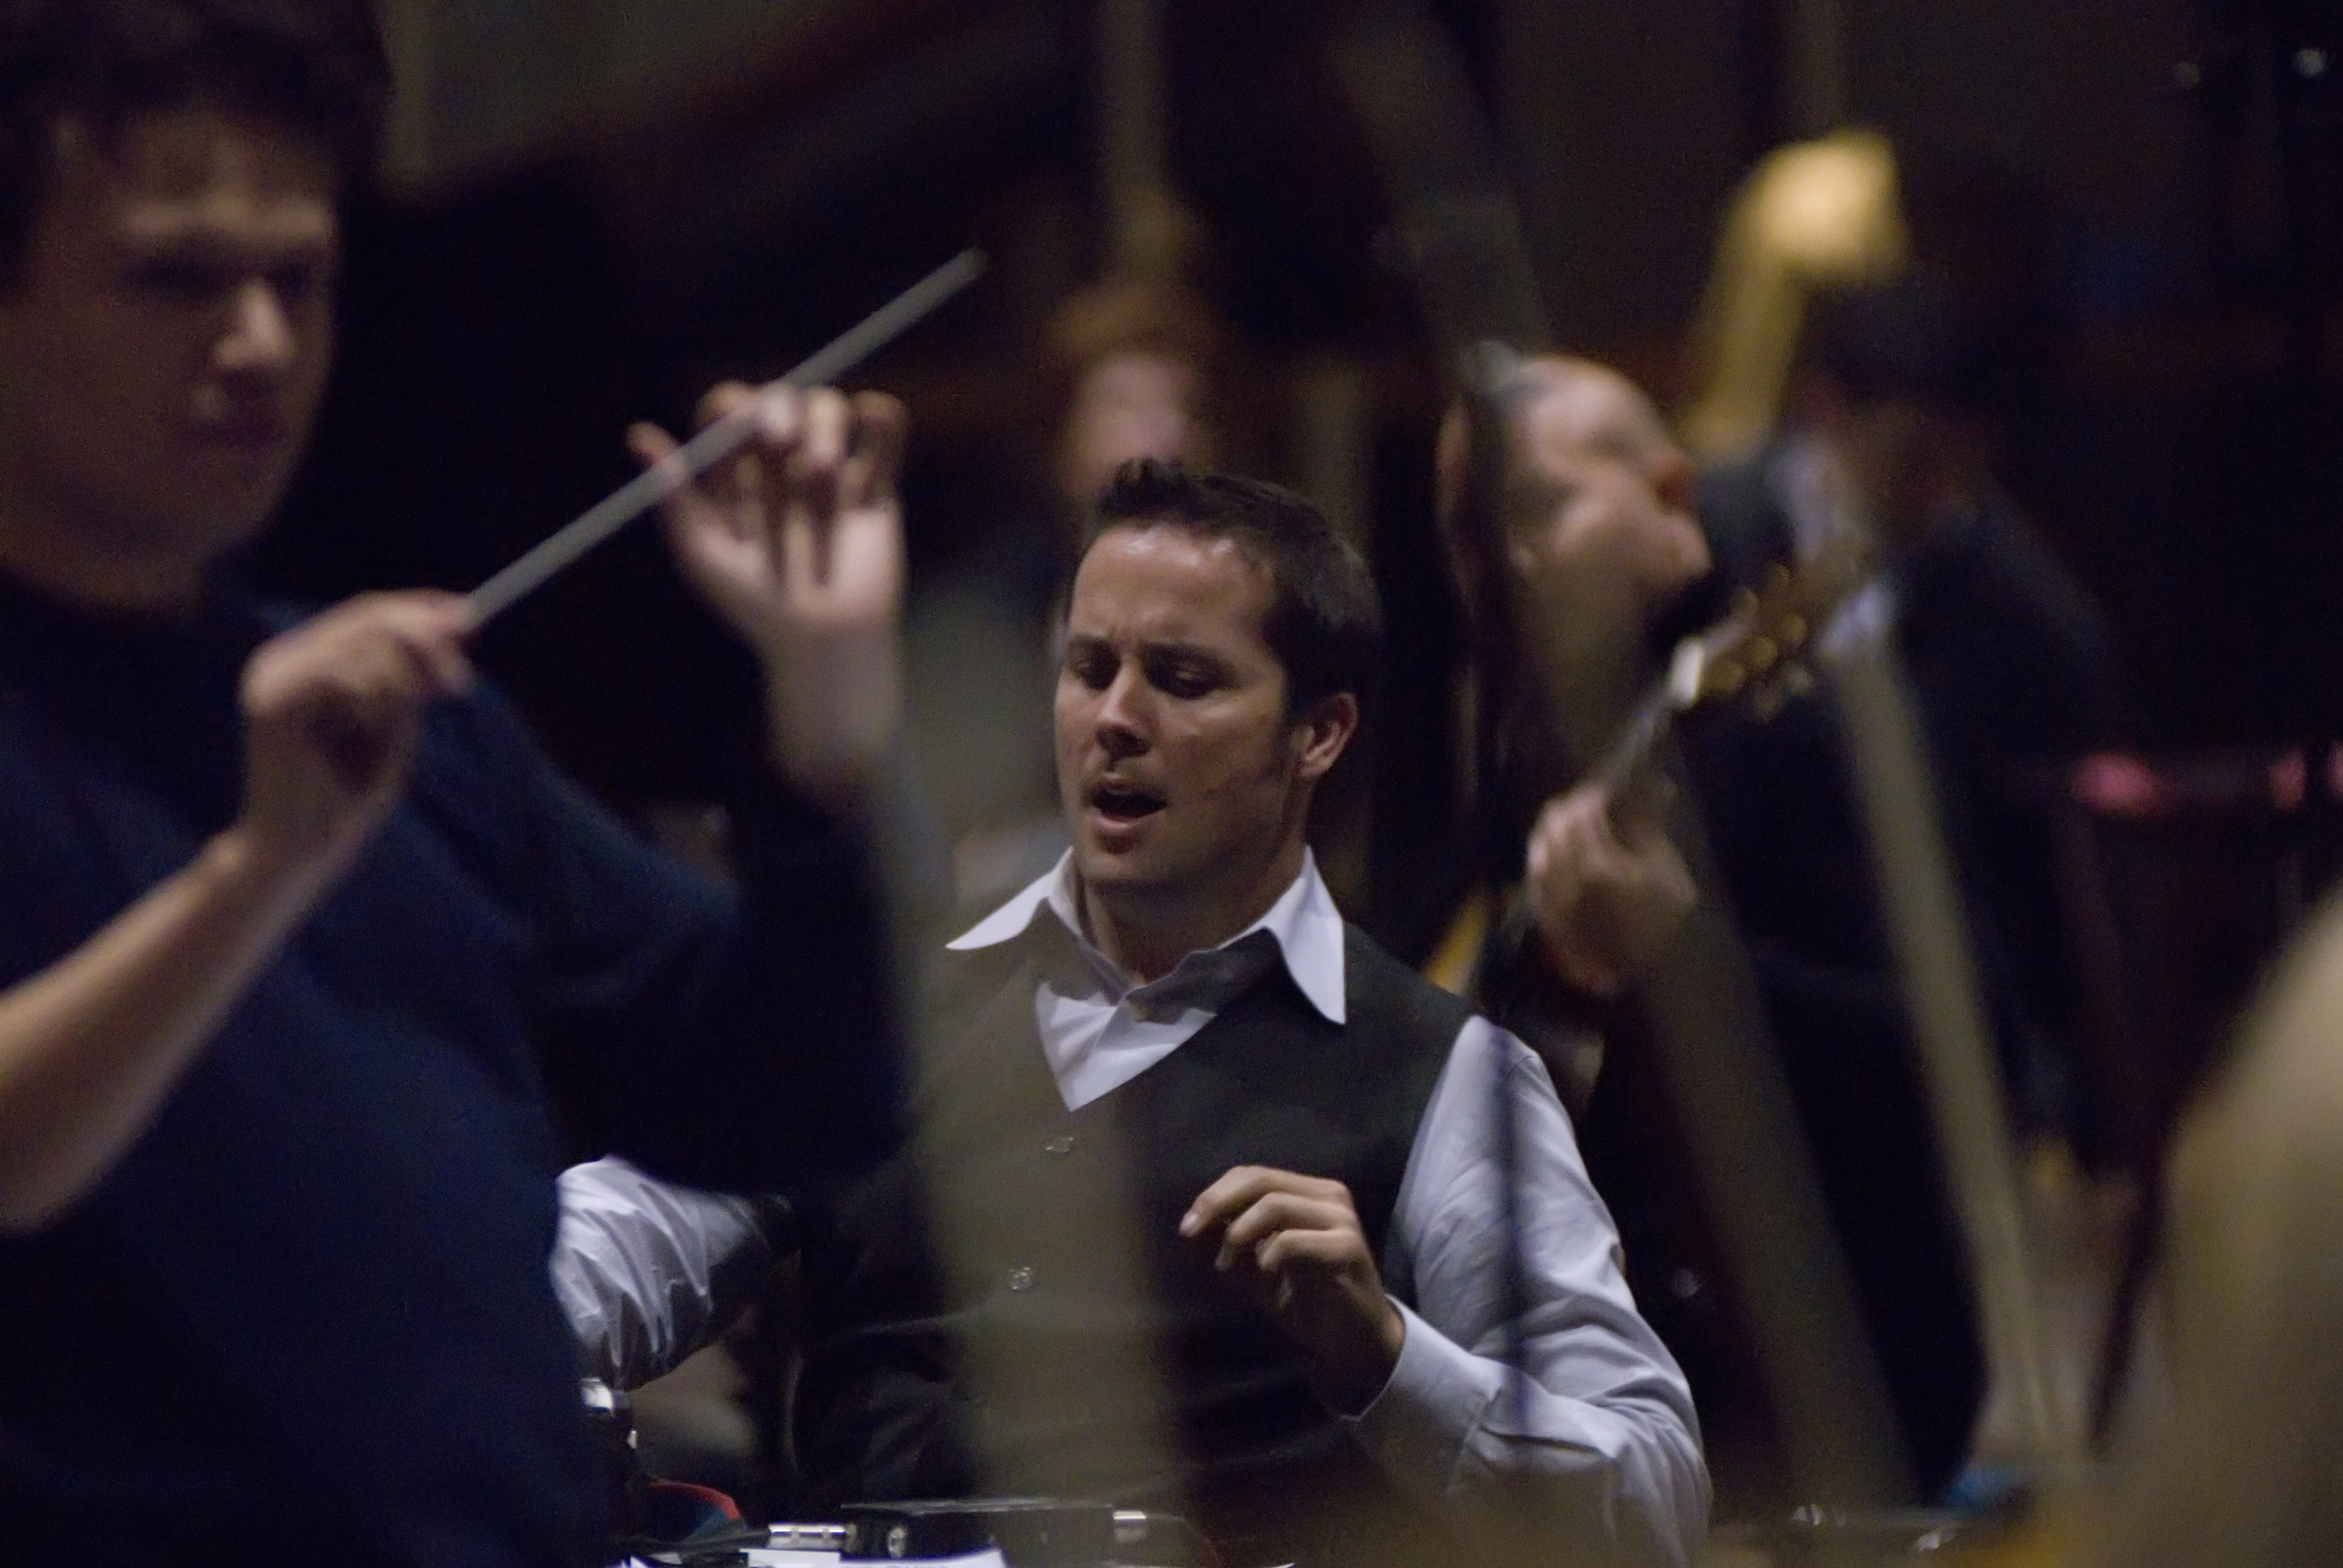 Mateo Messina recording with the orchestra.